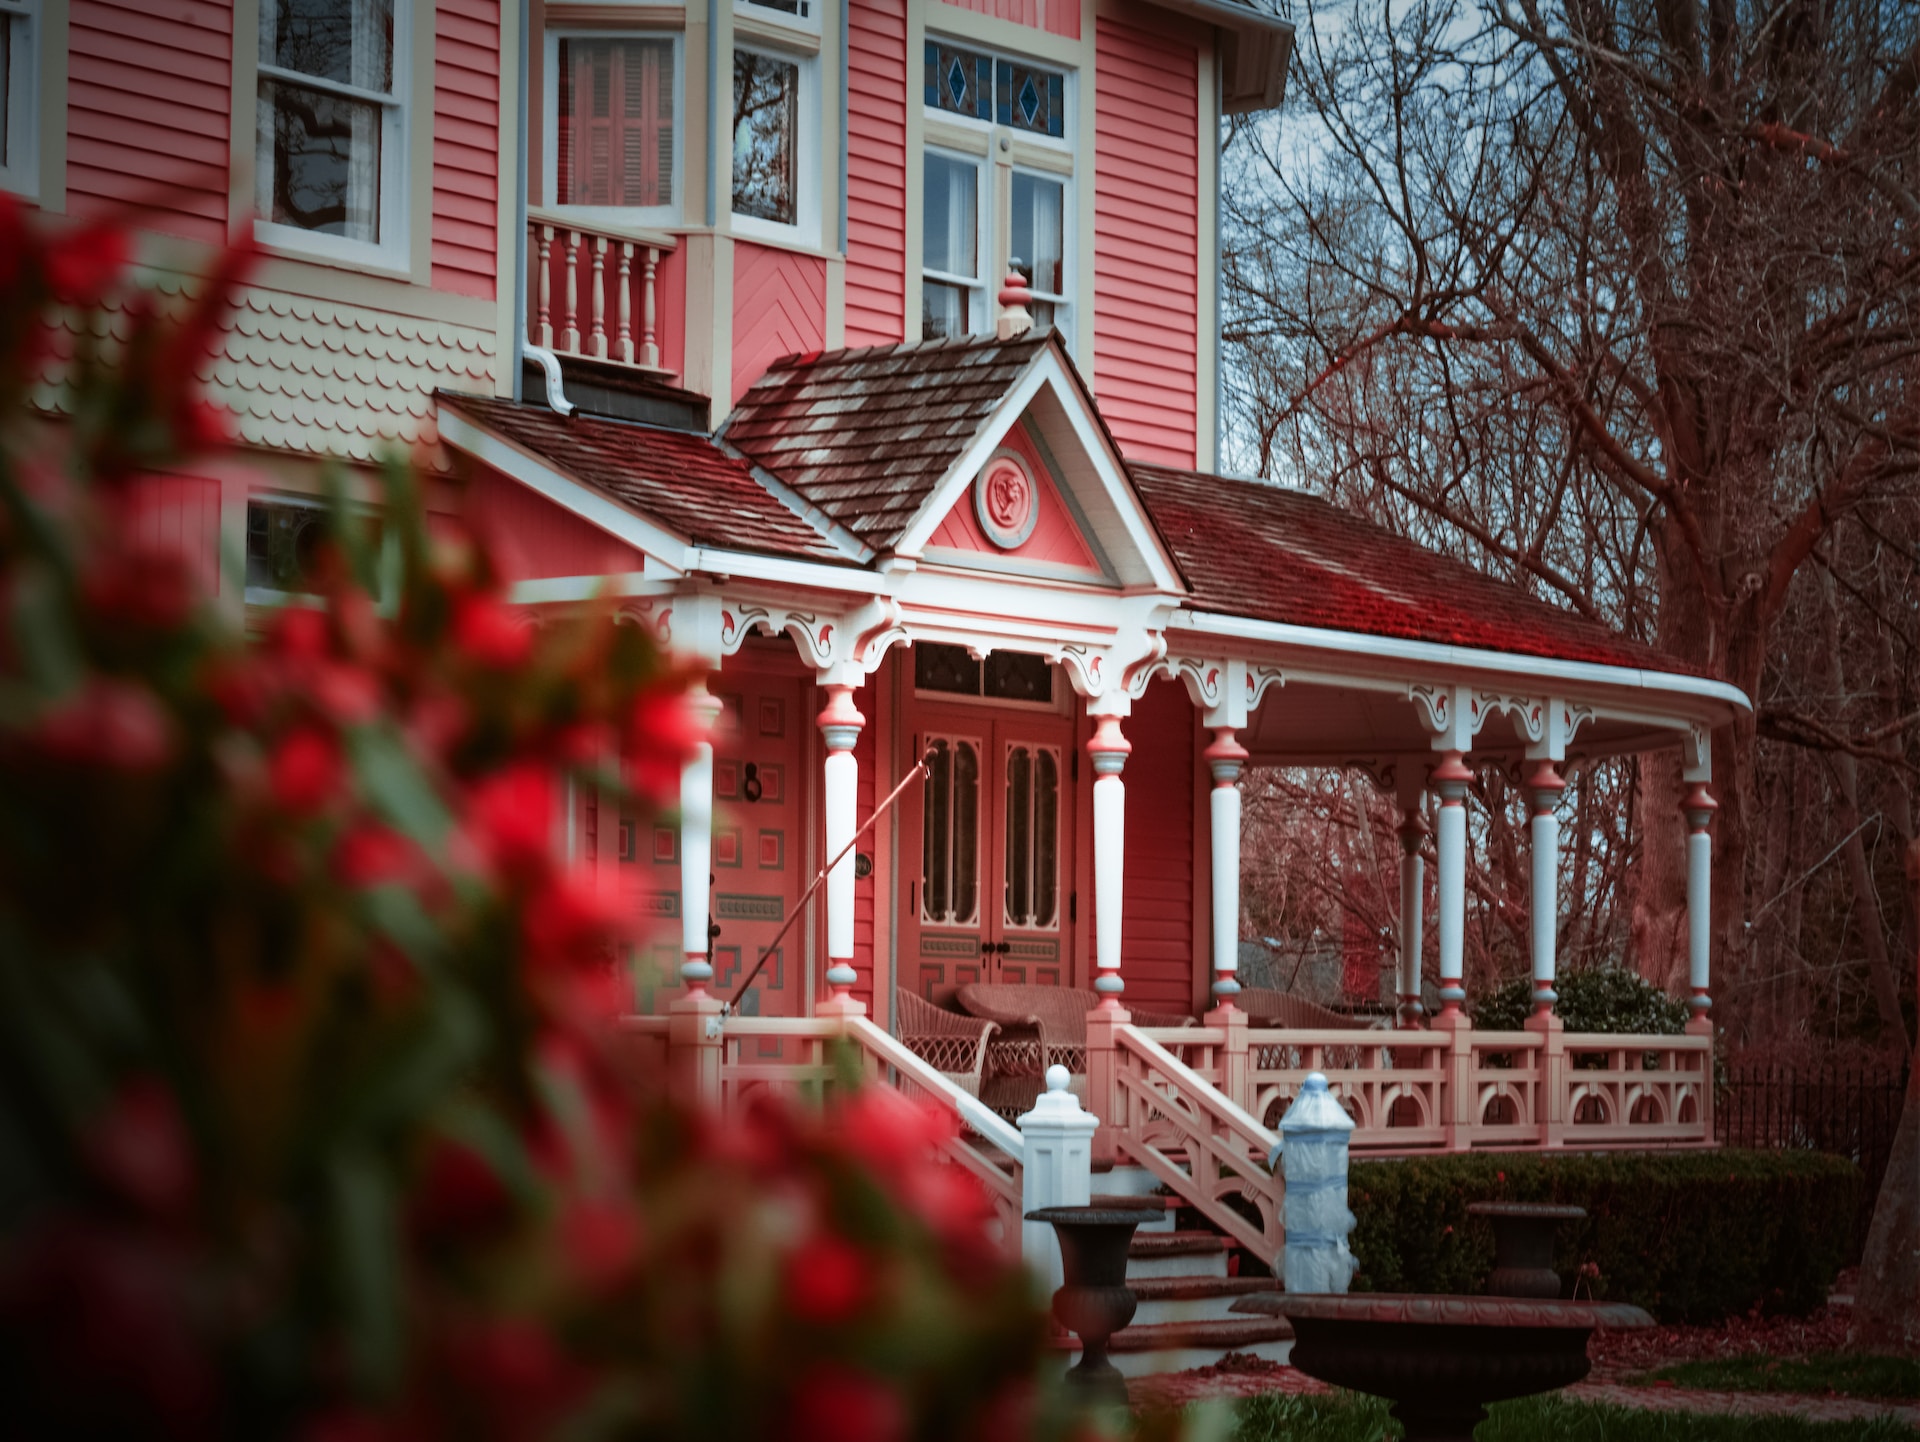 The Belvidere neighborhood boasts some of the most stunning Victorian homes in the entire area.